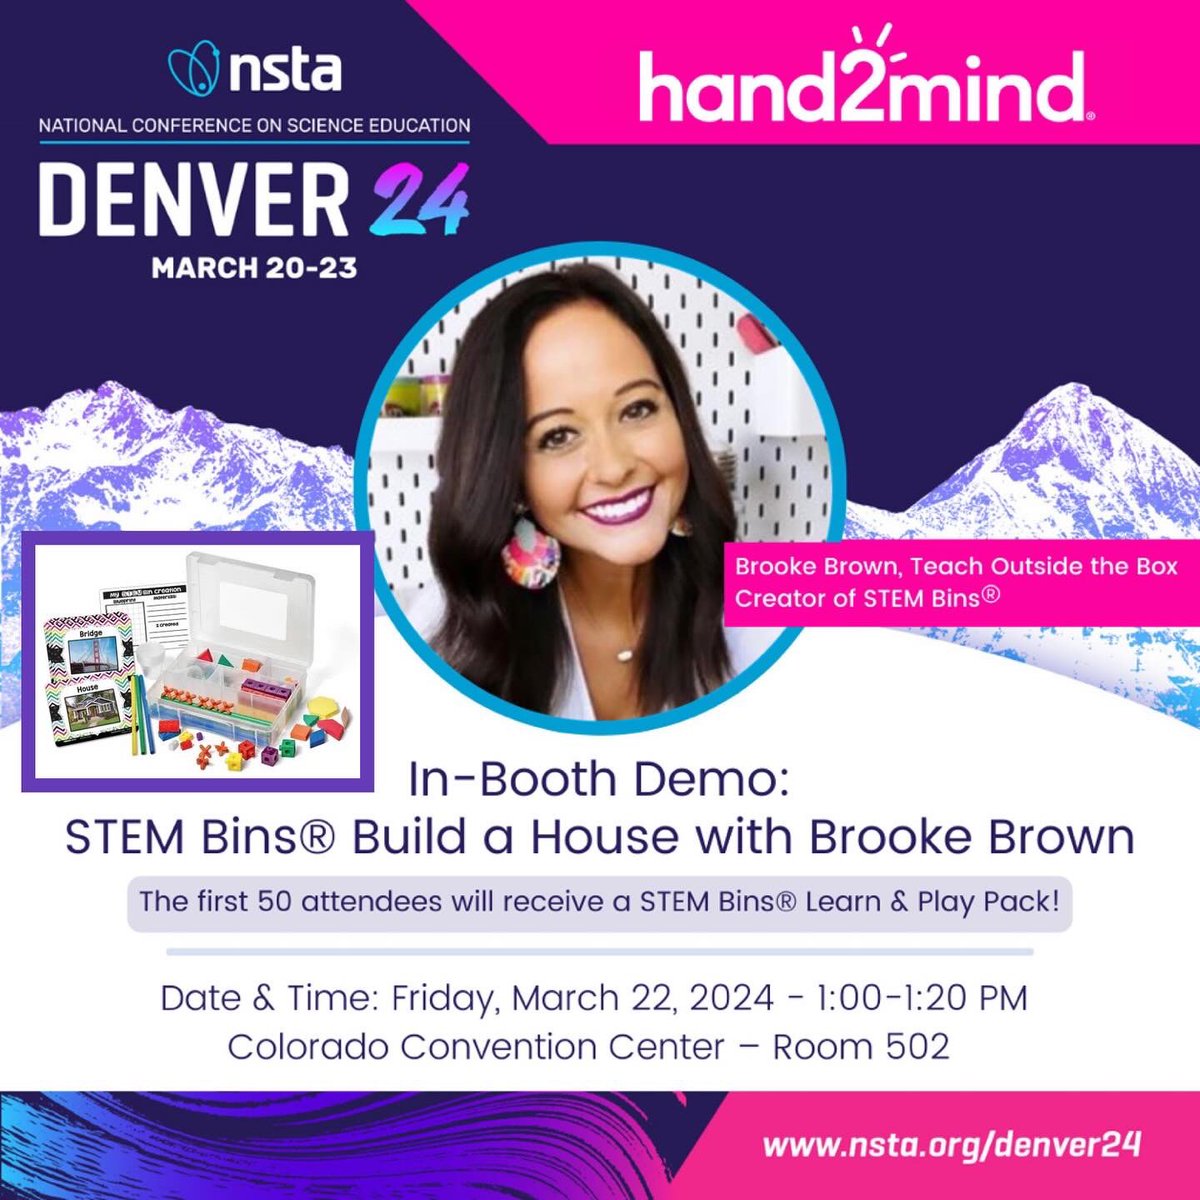 It’s a beautiful day at @NSTA Denver! 🥰🎉 Join me at the @hand2mind booth from 1:00-1:20 for a STEM Bins demo and the first 50 attendees get a FREE Learn and Play pack! 😱🙌 Also, make sure to join me for my full session at 4:00: STEM Bins: Engineering Through Play!